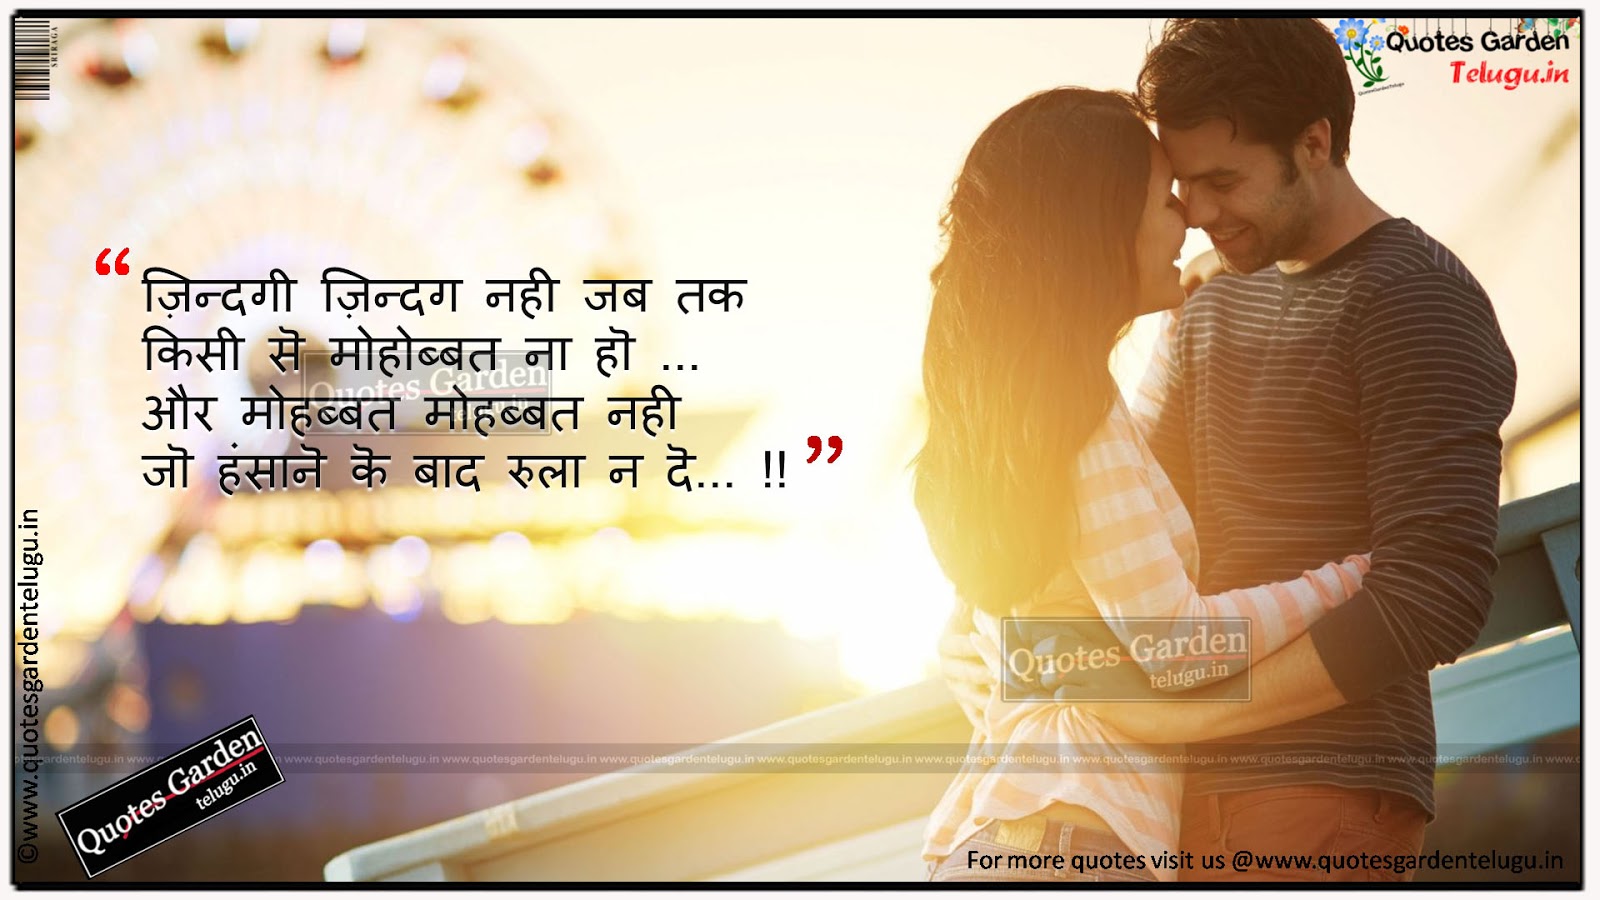 34 quotes in hindi best hindi love quotes new latest love quotes in hindi